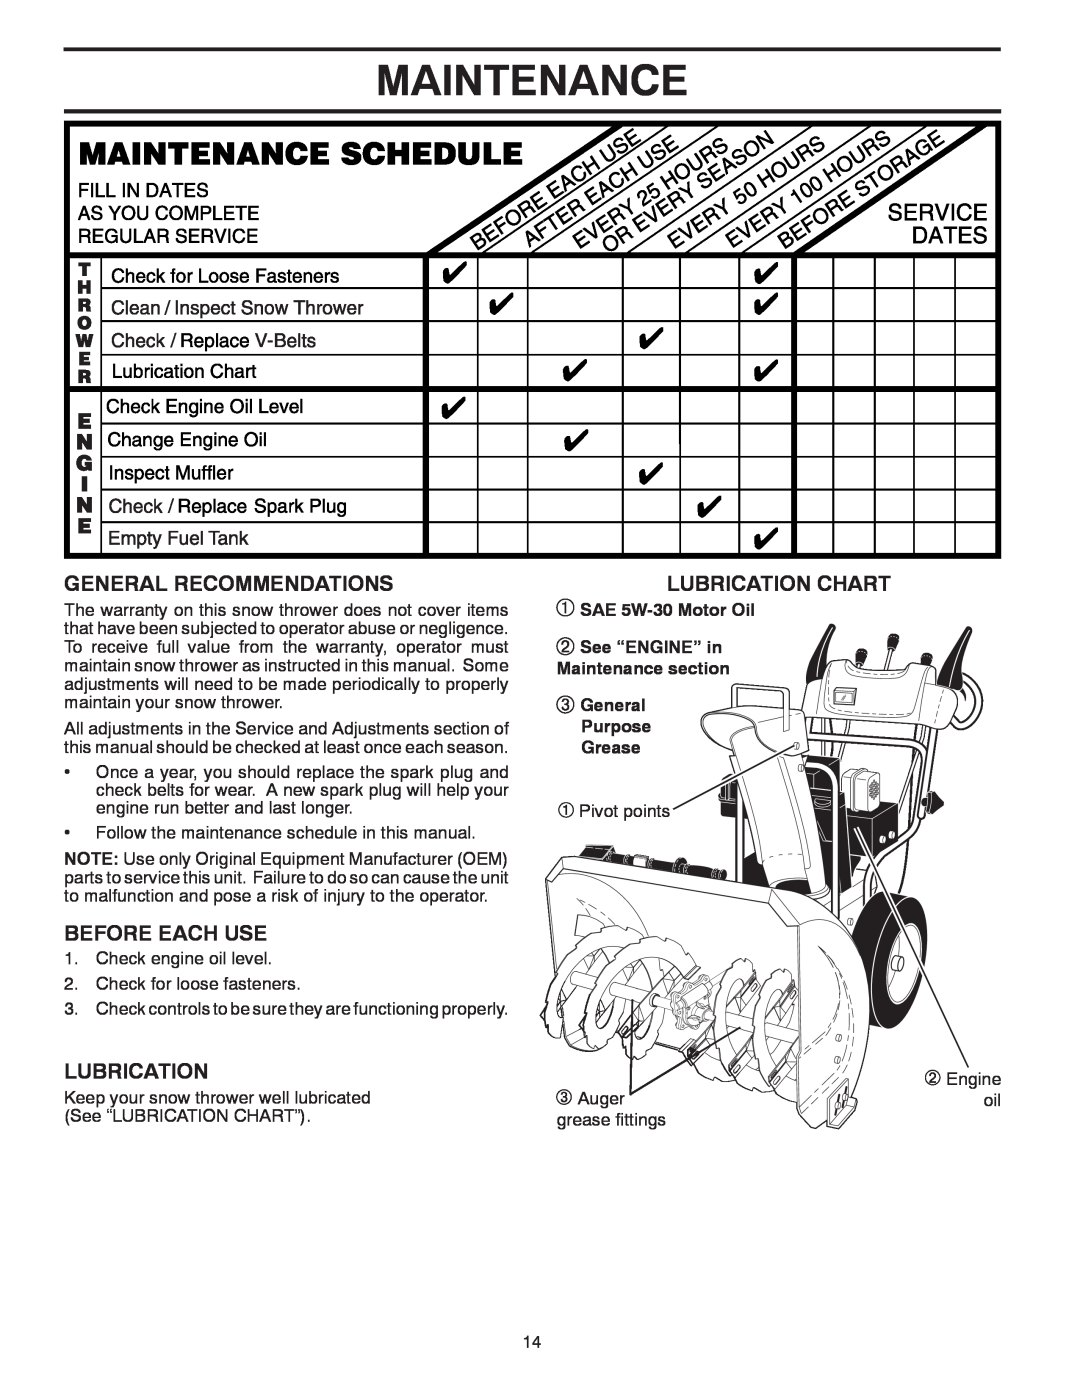 Poulan 421916 owner manual Maintenance, General Recommendations, Before Each Use, Lubrication Chart 